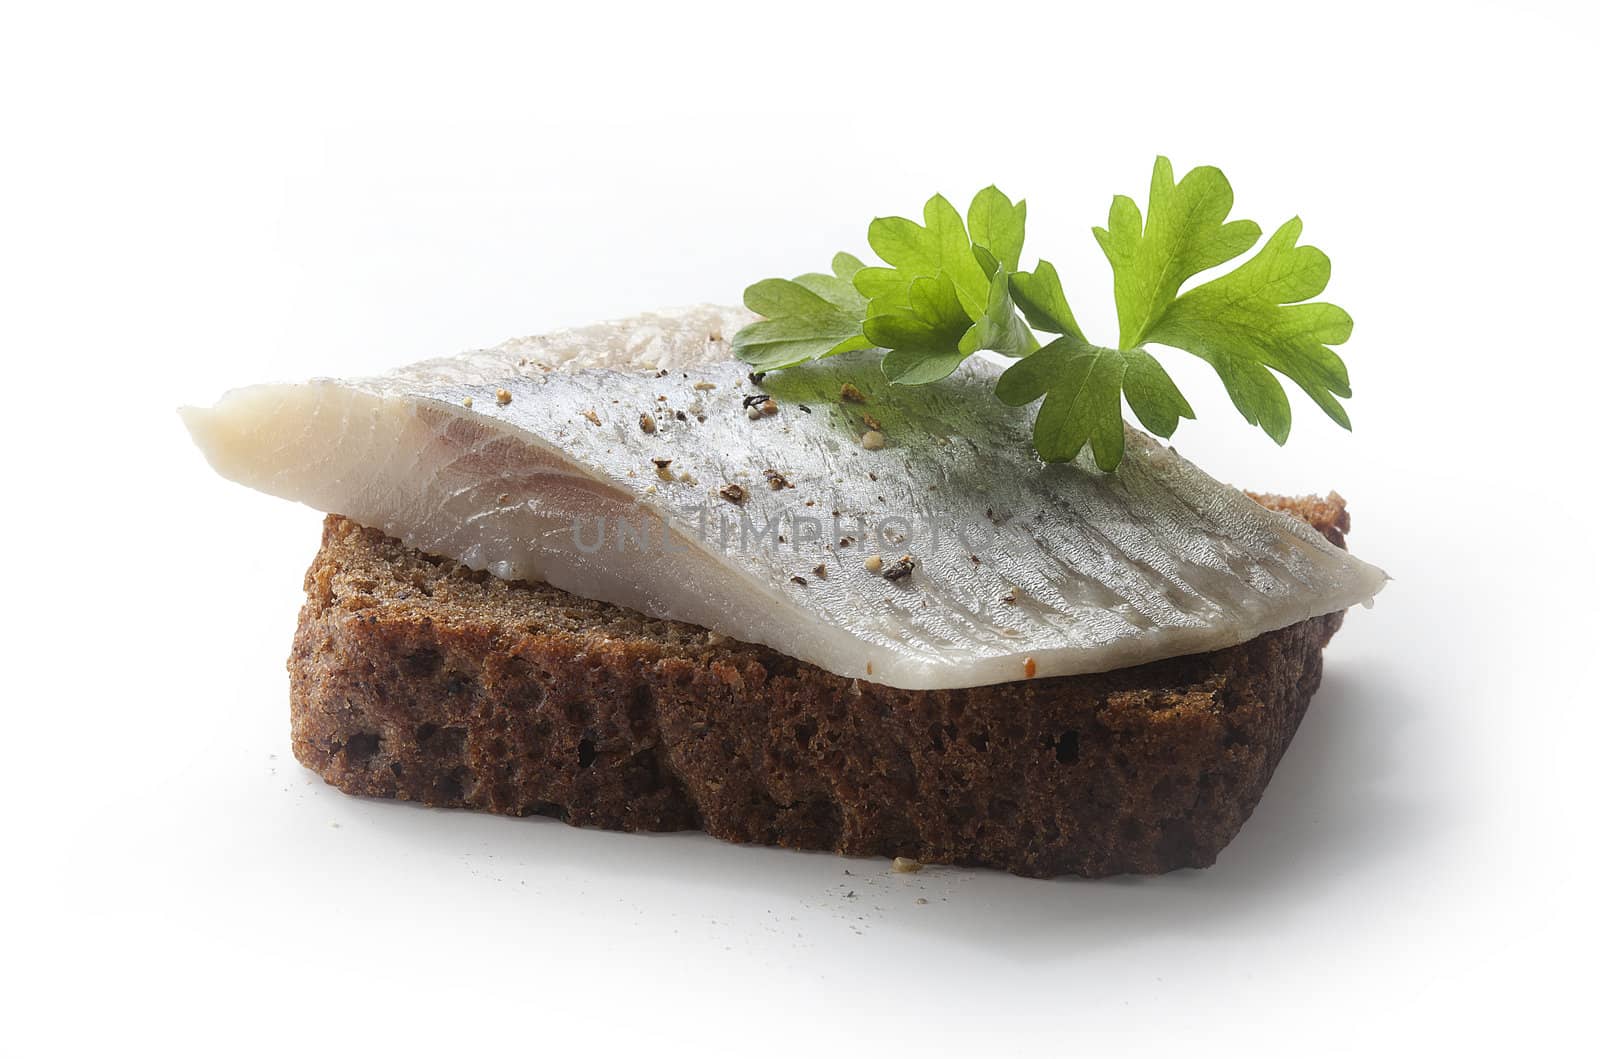 Sandwich with piece of herring, green parsley, onion and rye bread